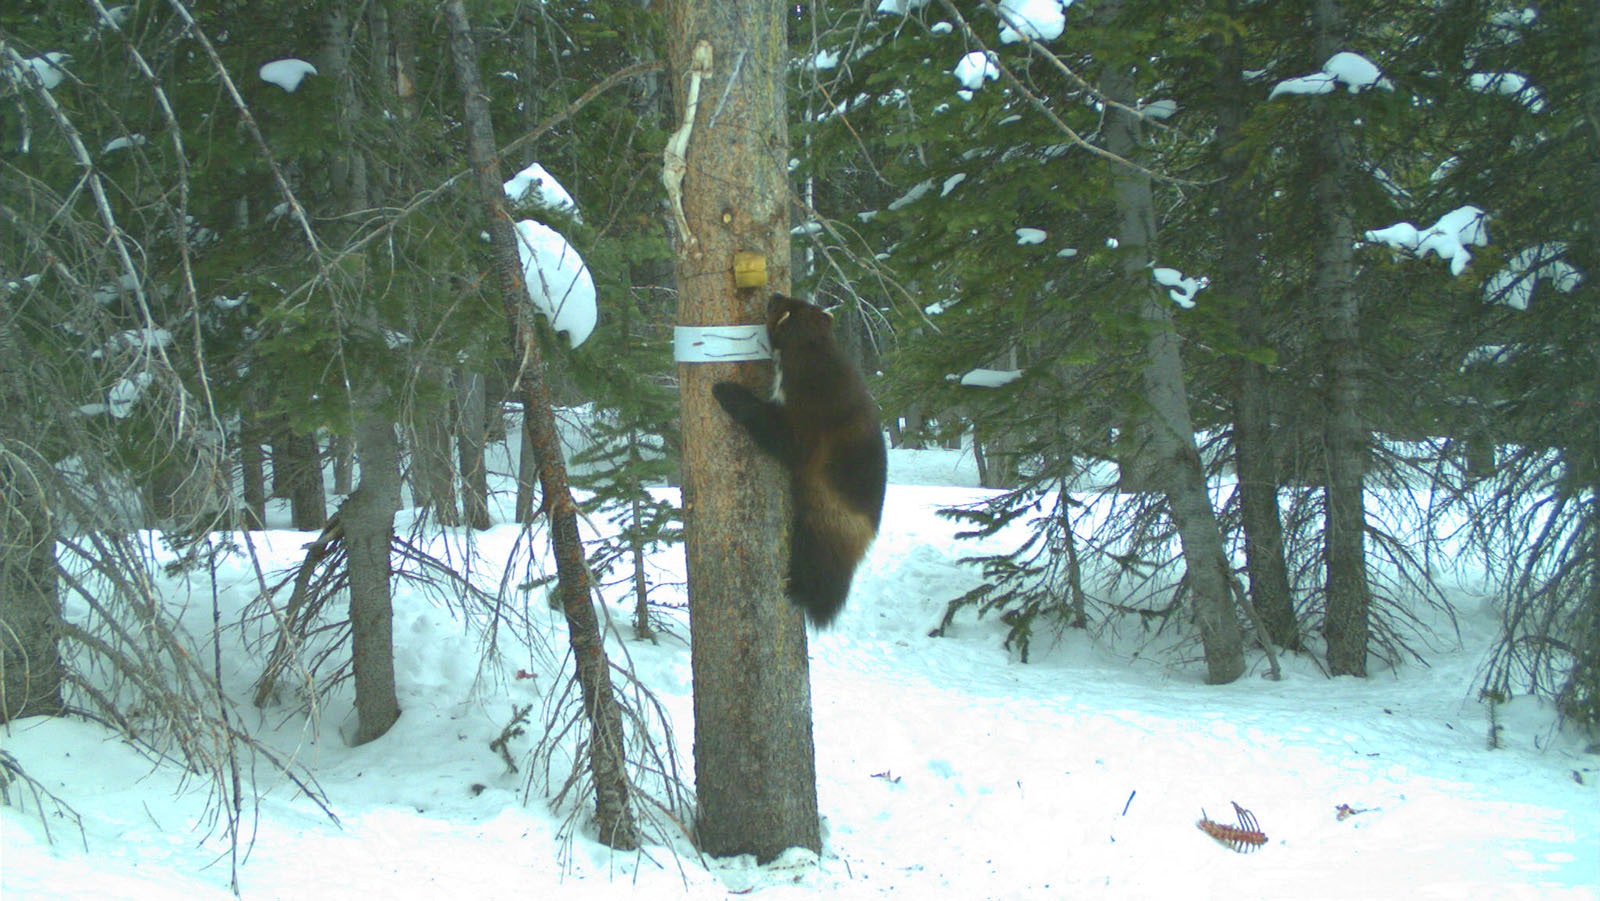 Wyoming’s 15 or so wolverines are so elusive, even some of the biologists who study them have never seen one in the flesh.